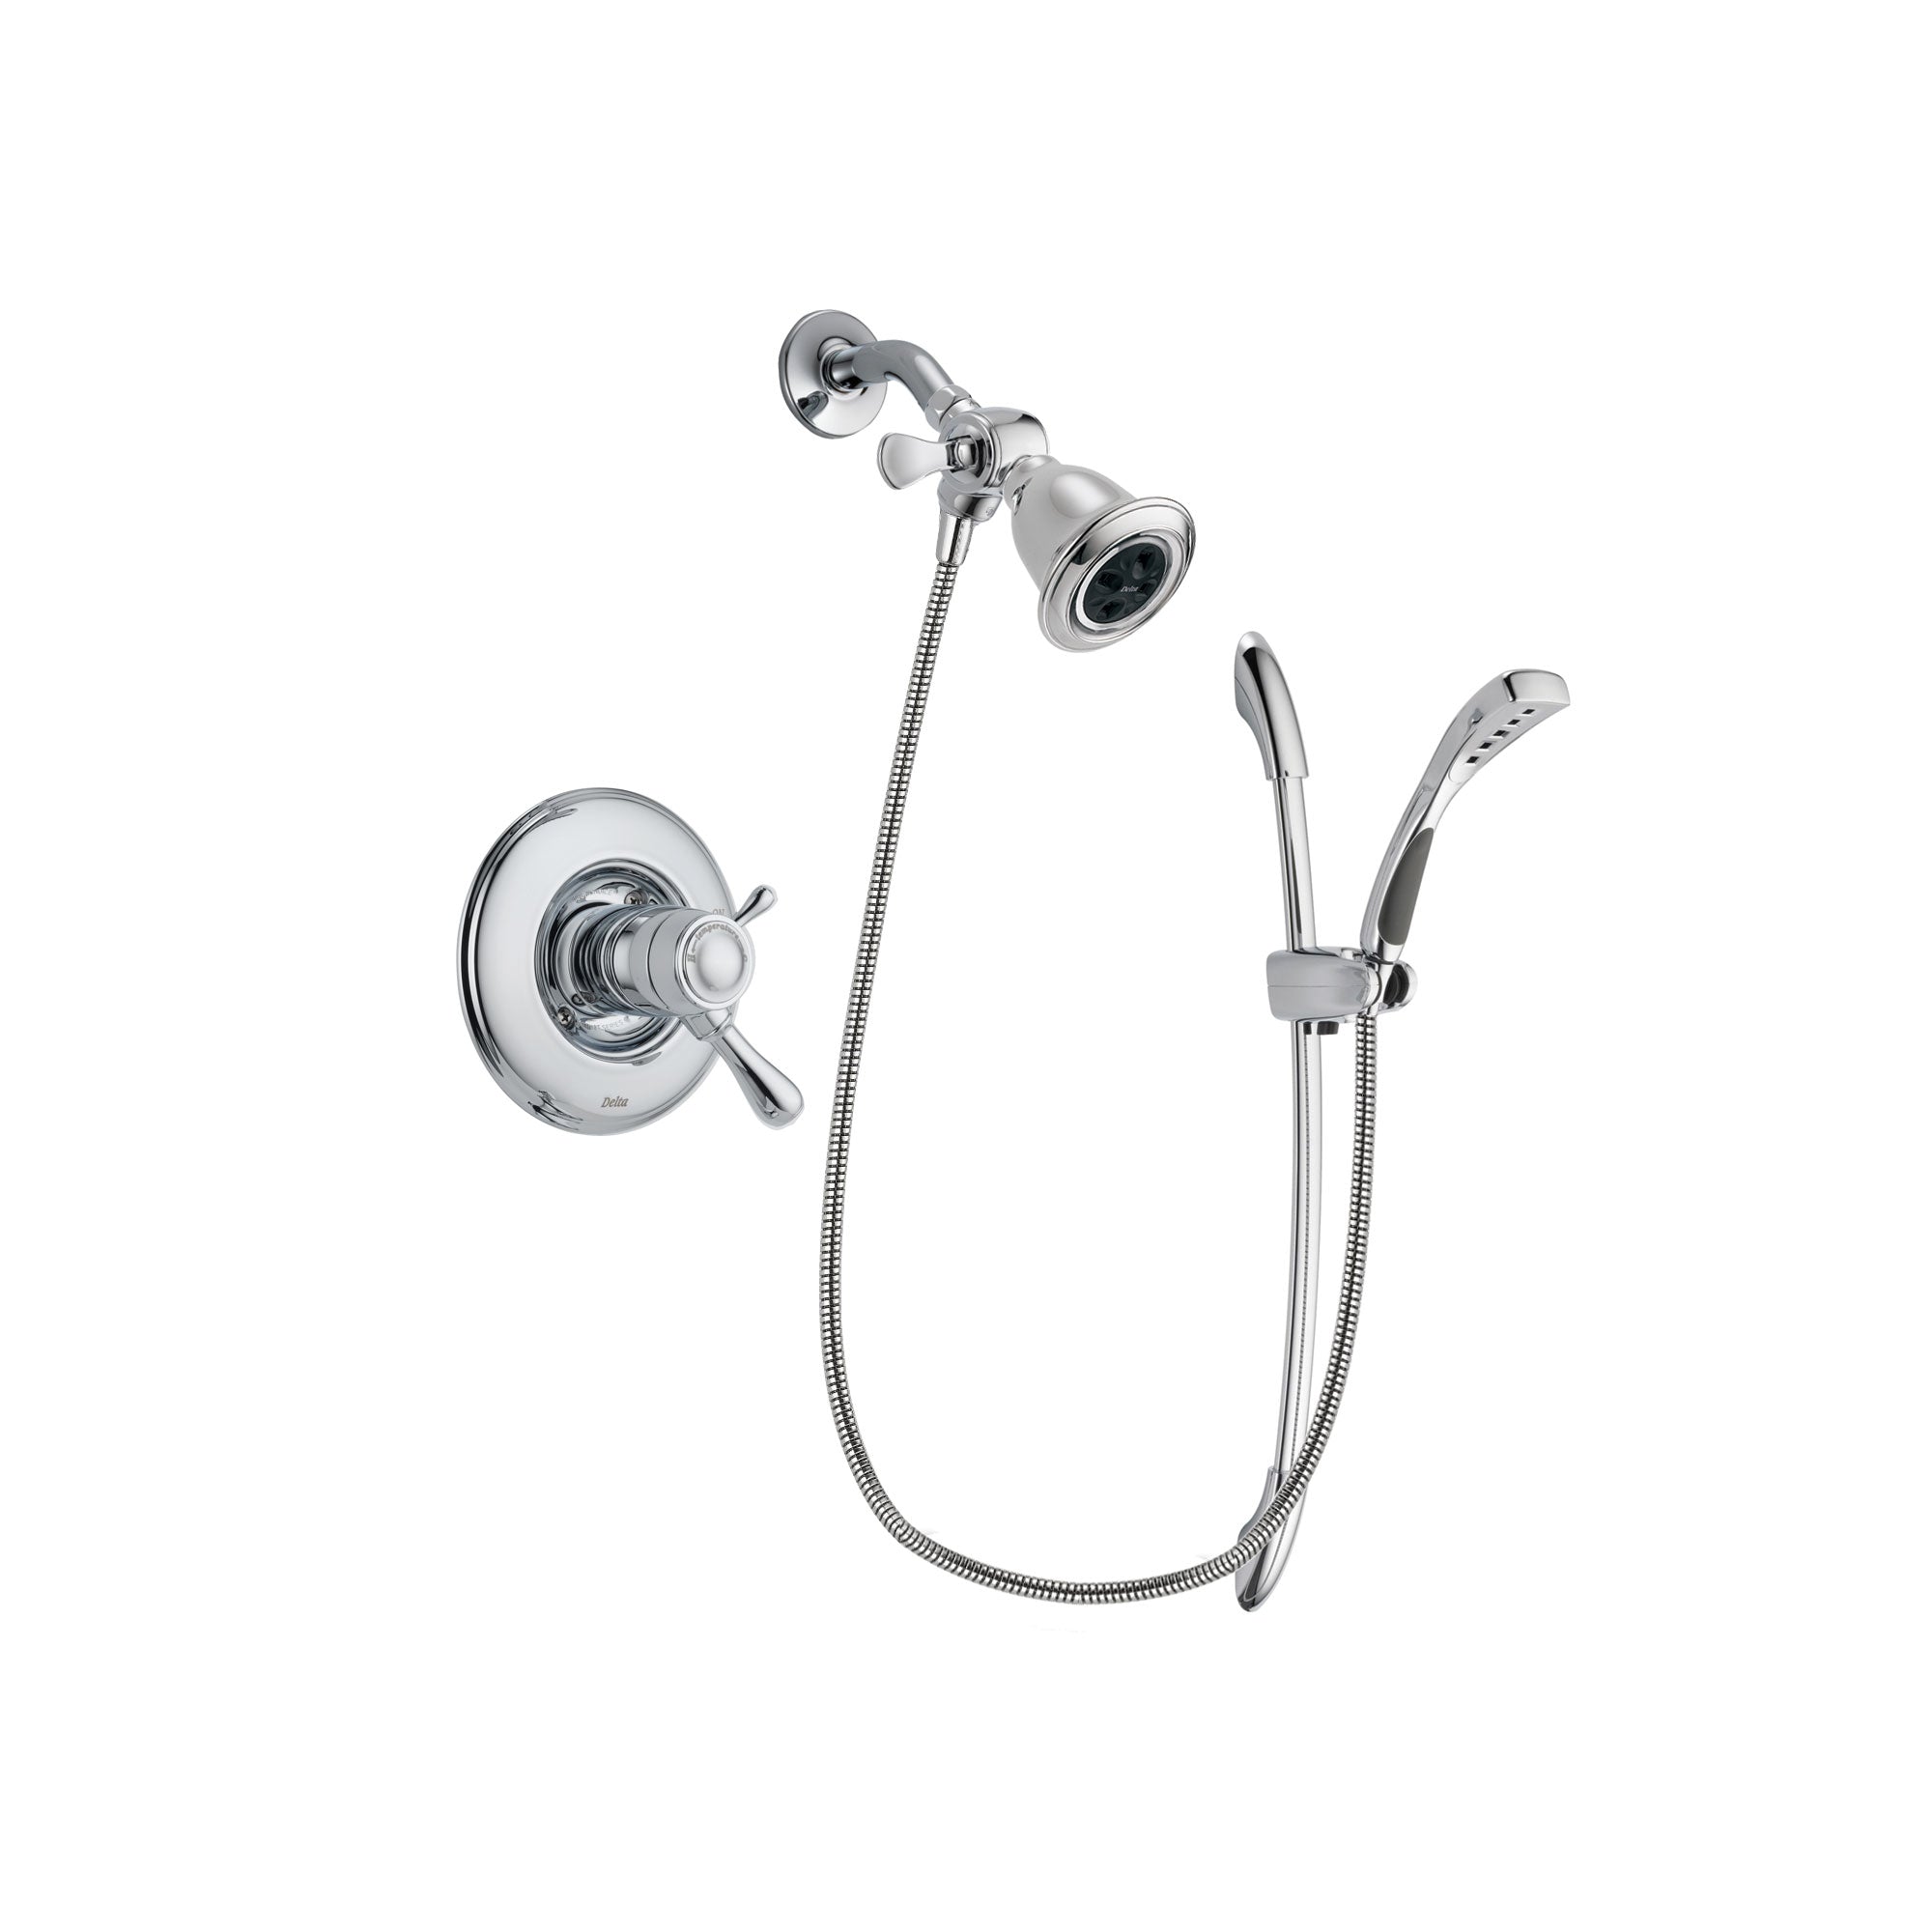 Delta Leland Chrome Finish Thermostatic Shower Faucet System Package with Water Efficient Showerhead and Handheld Shower with Slide Bar Includes Rough-in Valve DSP0464V